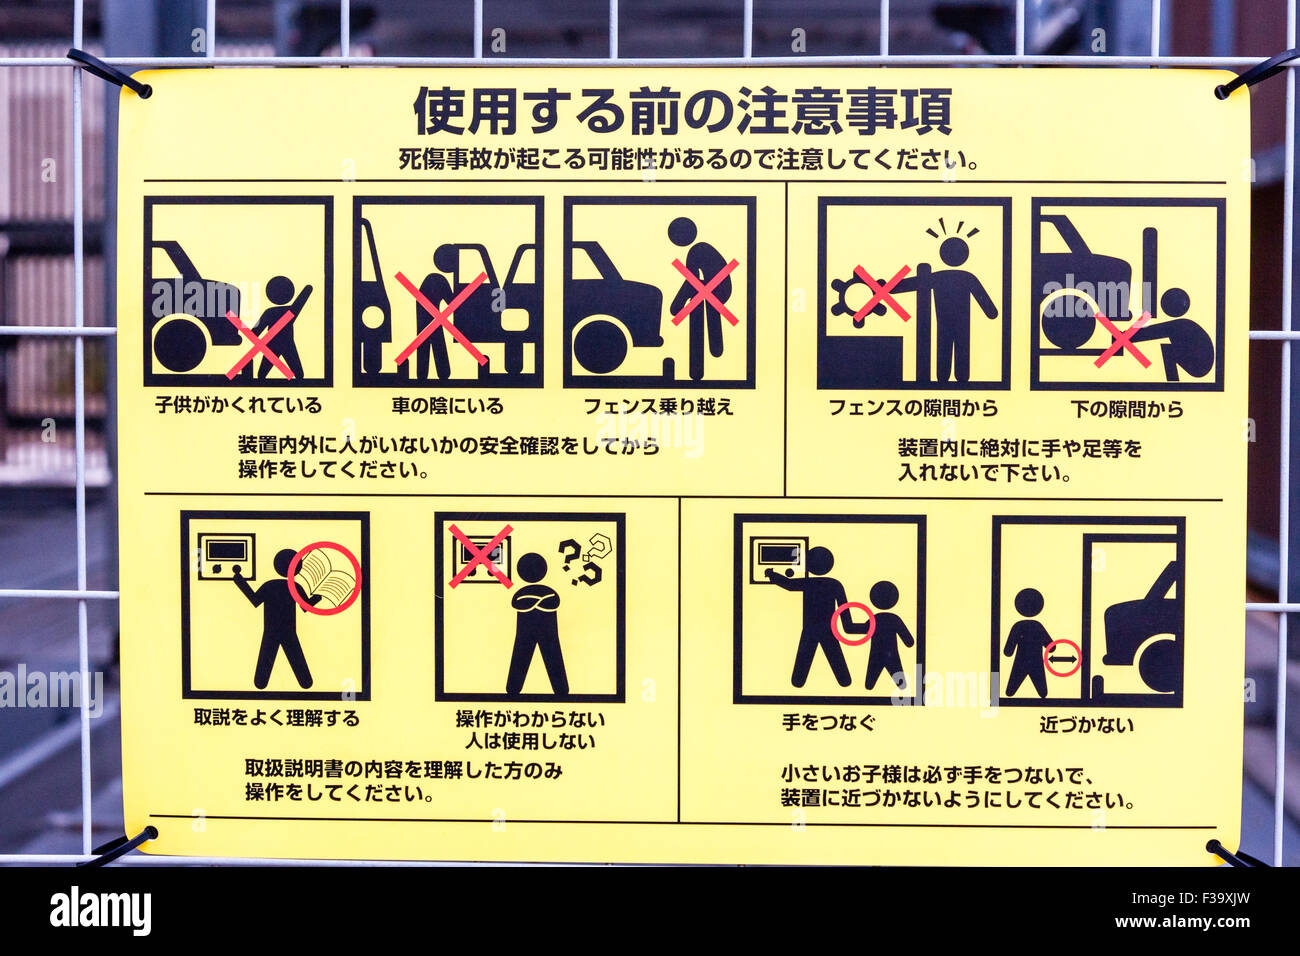 Japan, yellow information sign on how to use multi-storey car parking space with diagrams of what to do and warnings of the dangers. Stock Photo